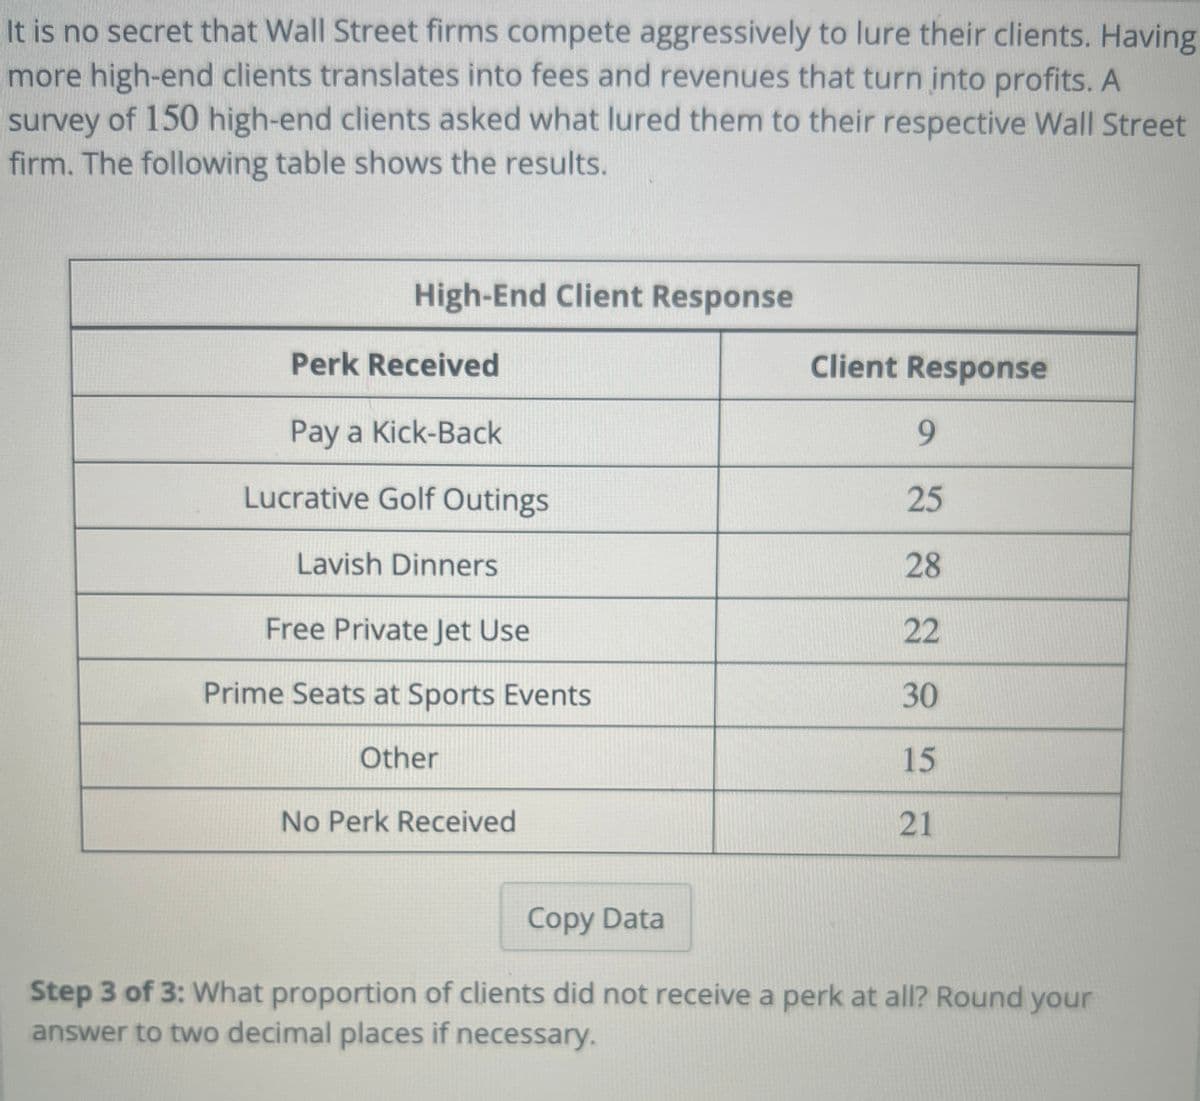 It is no secret that Wall Street firms compete aggressively to lure their clients. Having
more high-end clients translates into fees and revenues that turn into profits. A
survey of 150 high-end clients asked what lured them to their respective Wall Street
firm. The following table shows the results.
High-End Client Response
Perk Received
Pay a Kick-Back
Lucrative Golf Outings
Lavish Dinners
Free Private Jet Use
Prime Seats at Sports Events
Other
No Perk Received
Client Response
9
25
28
22
30
15
21
Copy Data
Step 3 of 3: What proportion of clients did not receive a perk at all? Round your
answer to two decimal places if necessary.